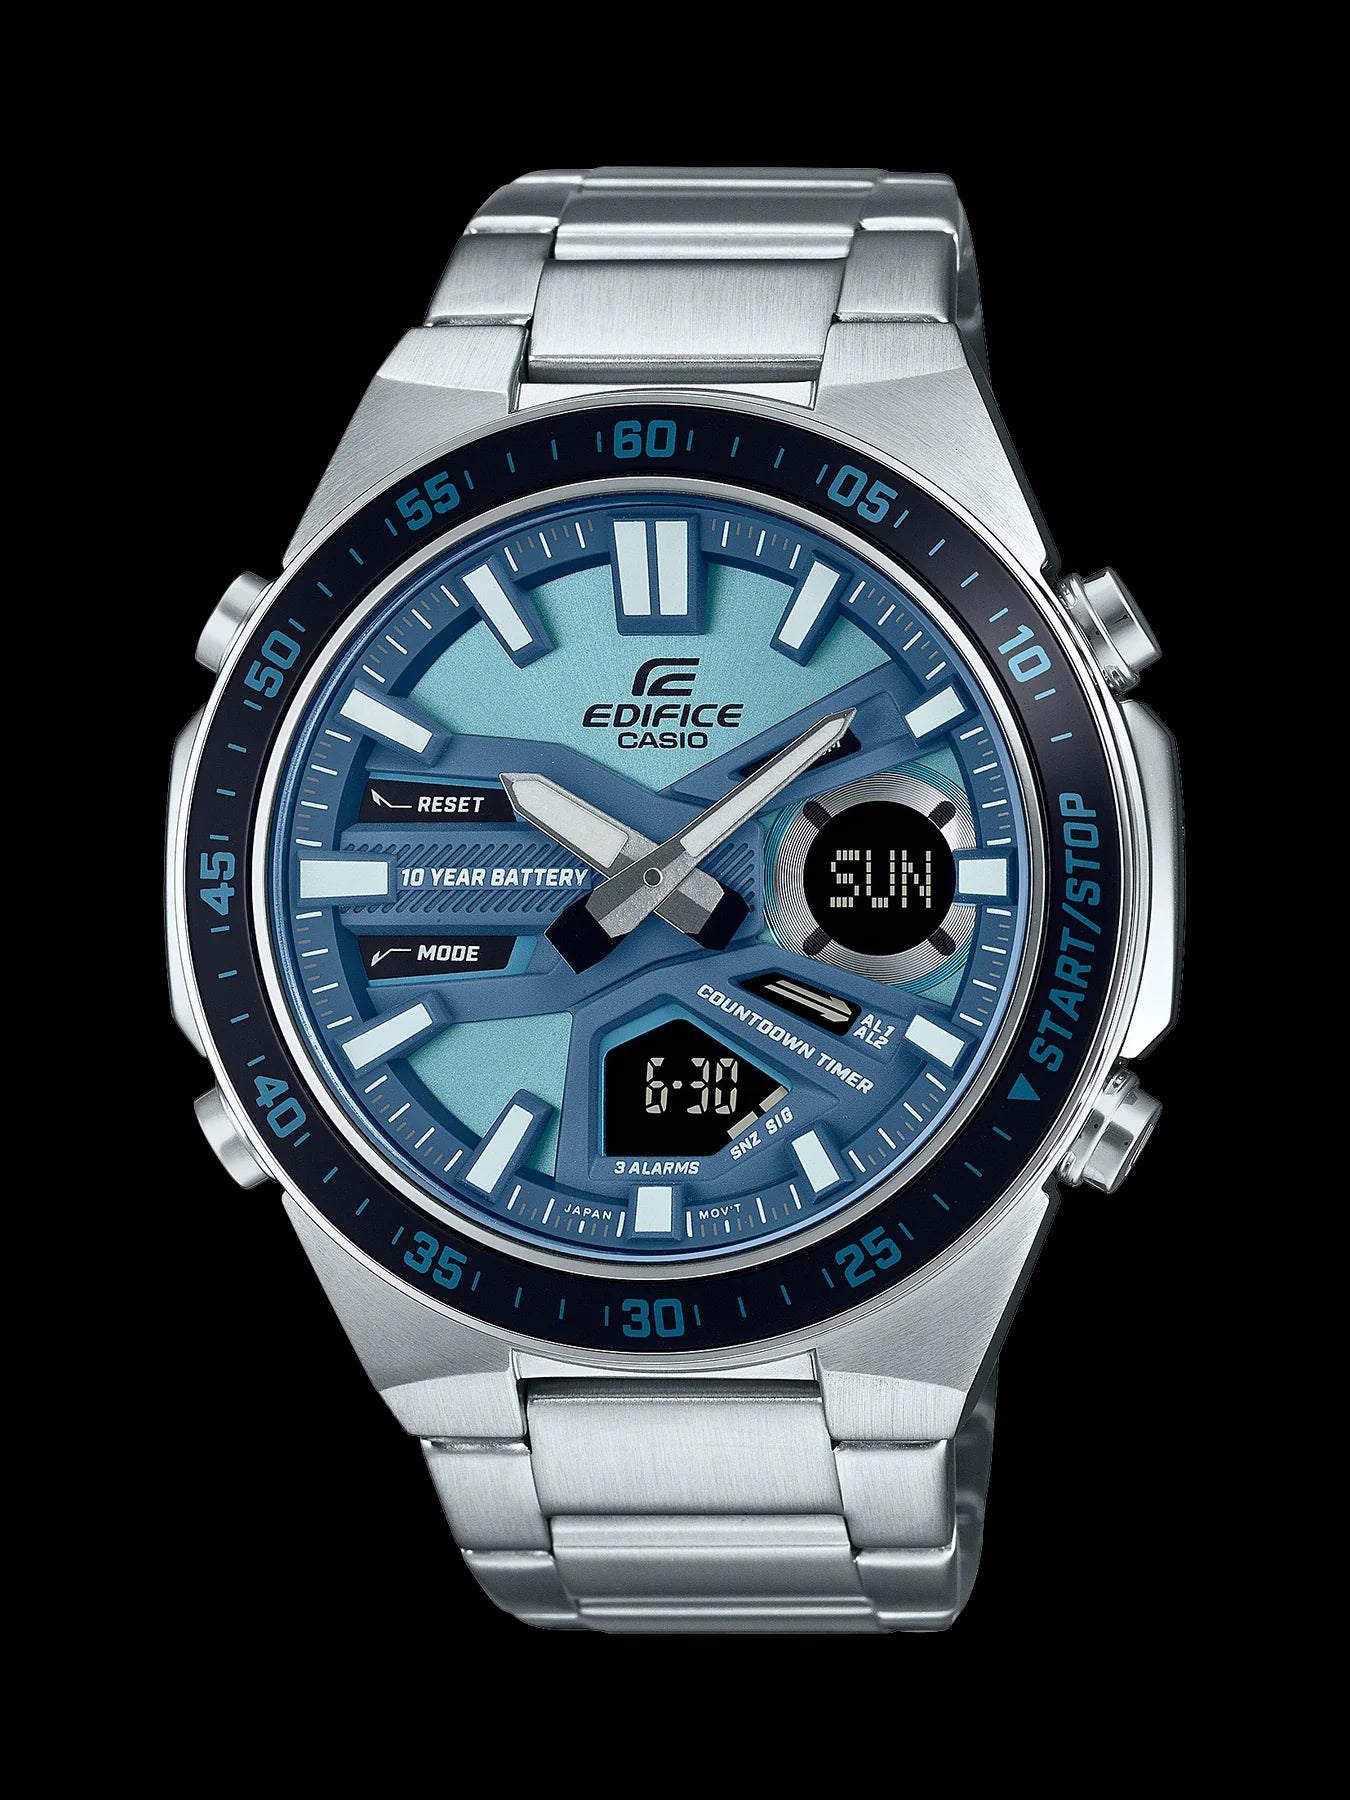 Casio Ediface Duo with Ice Blue Dial